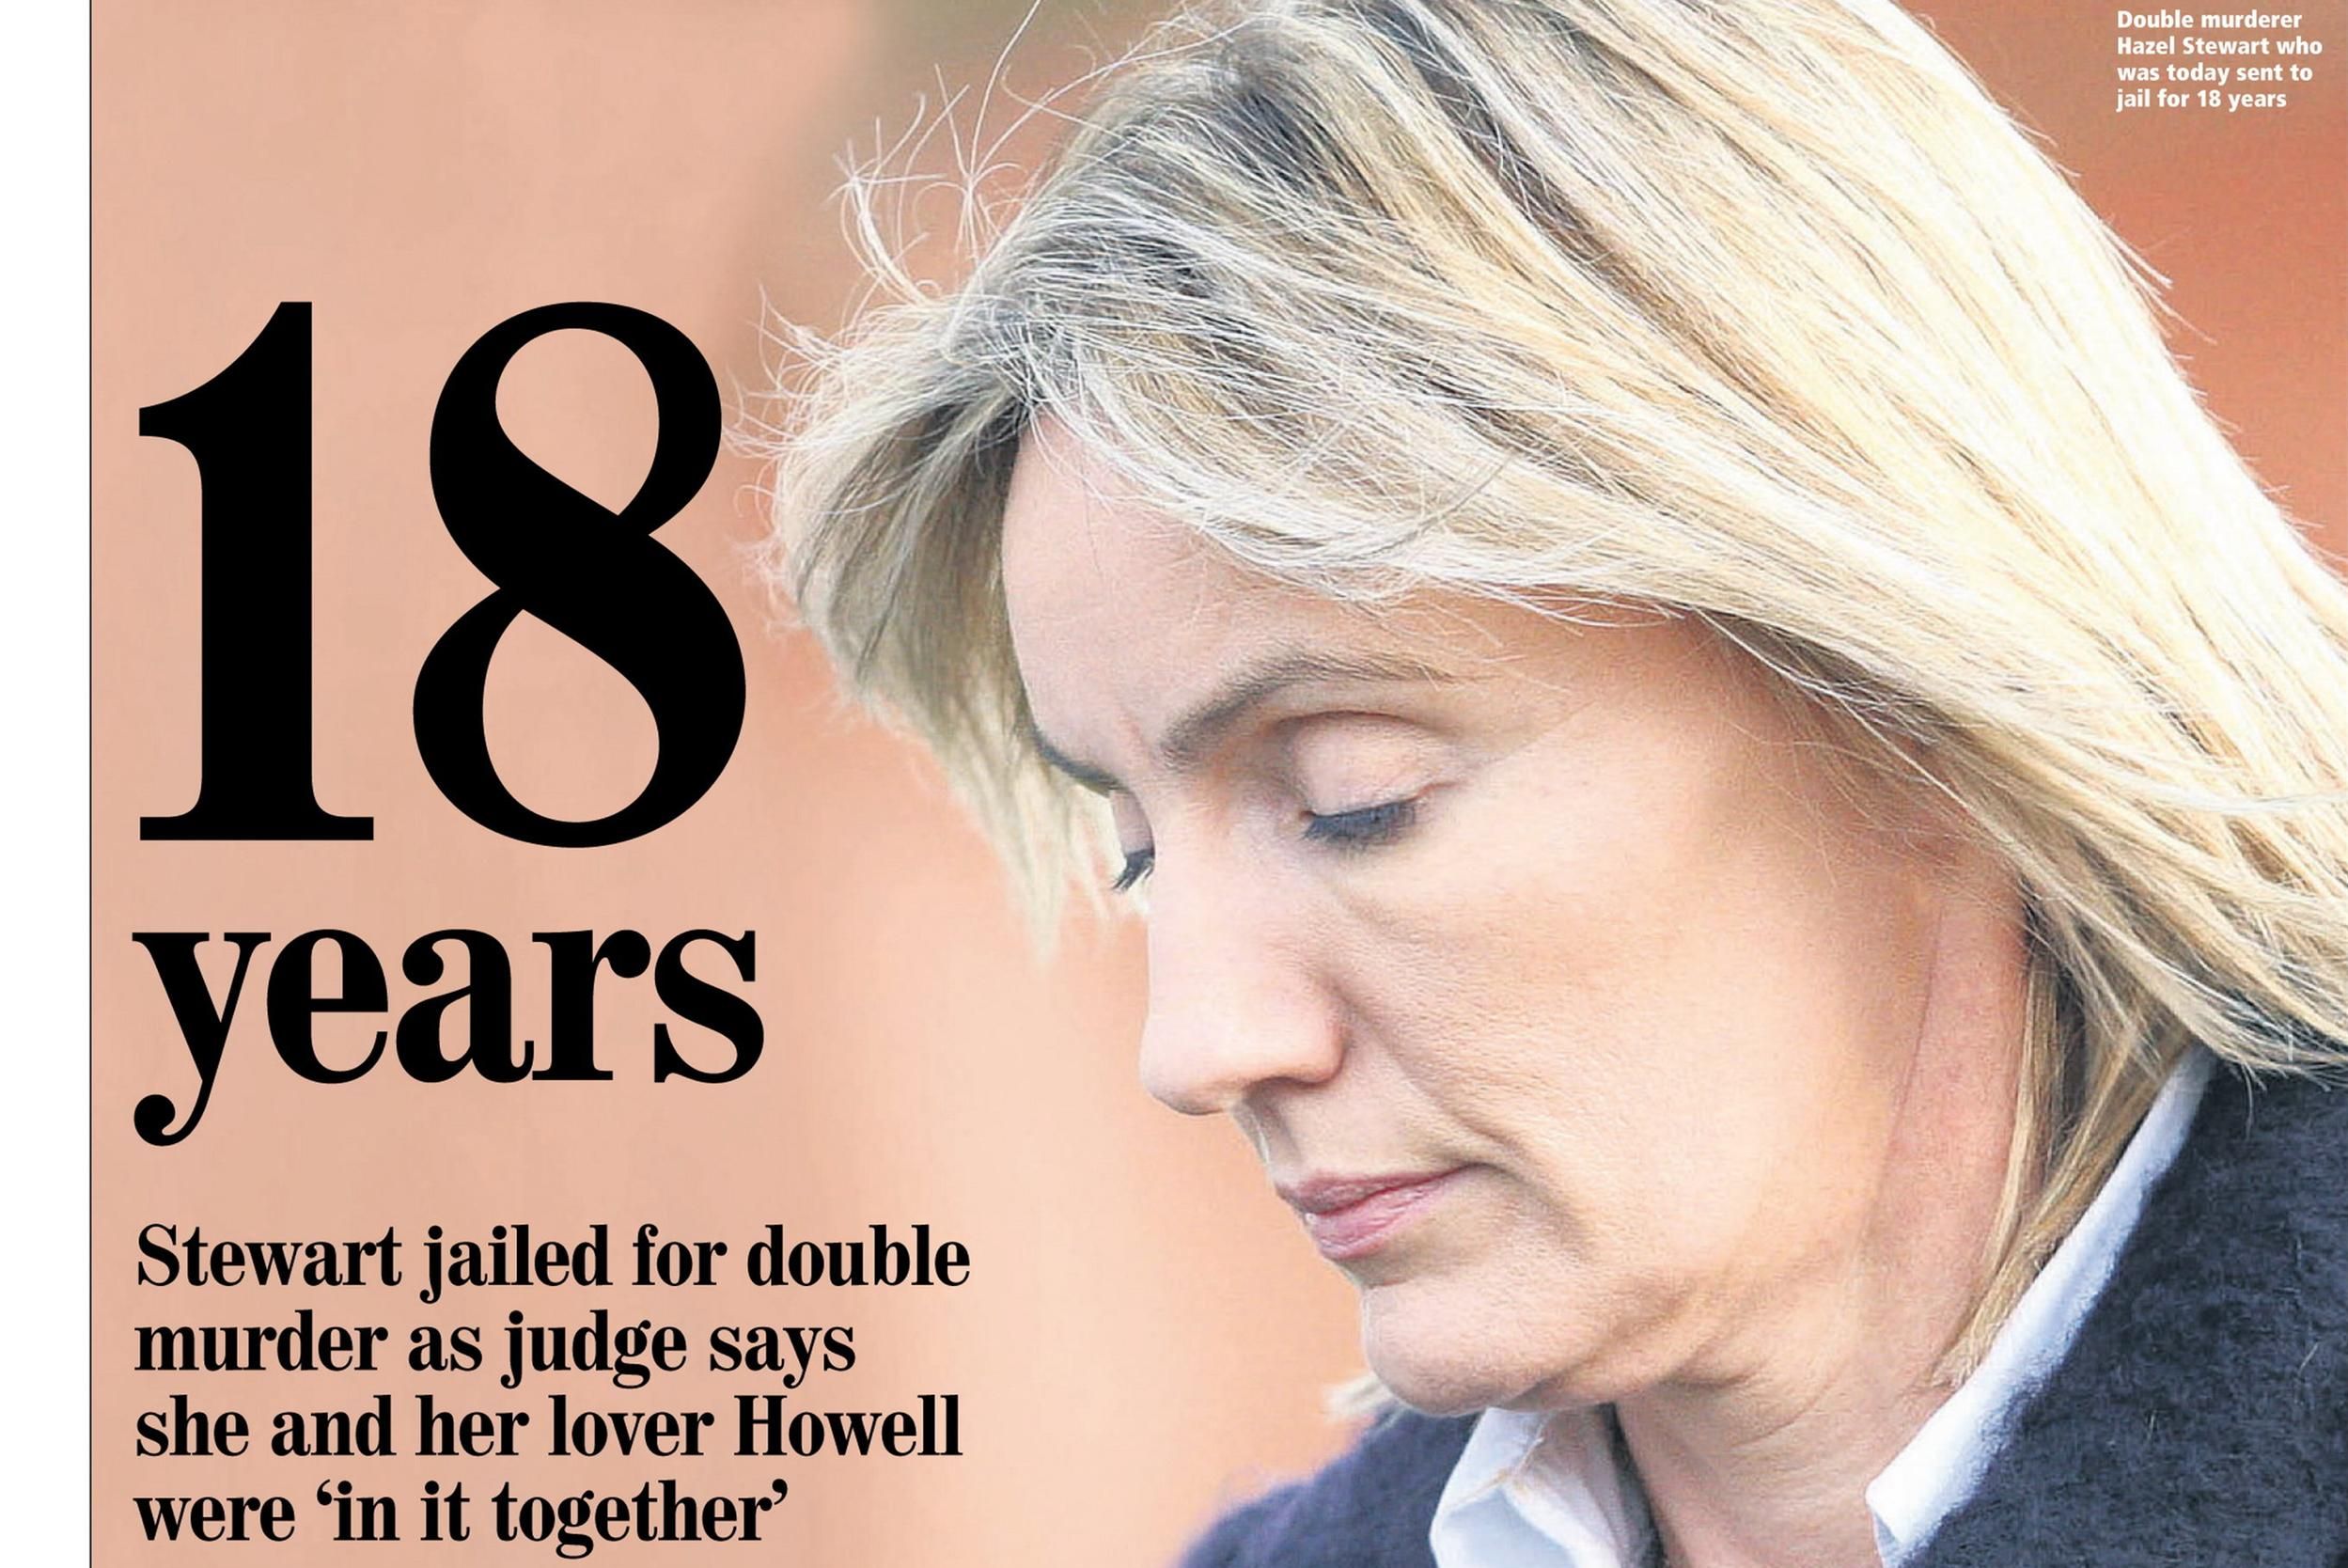 How story of Hazel Stewart and Colin Howell's double murder plot unfolded  over 21 years 